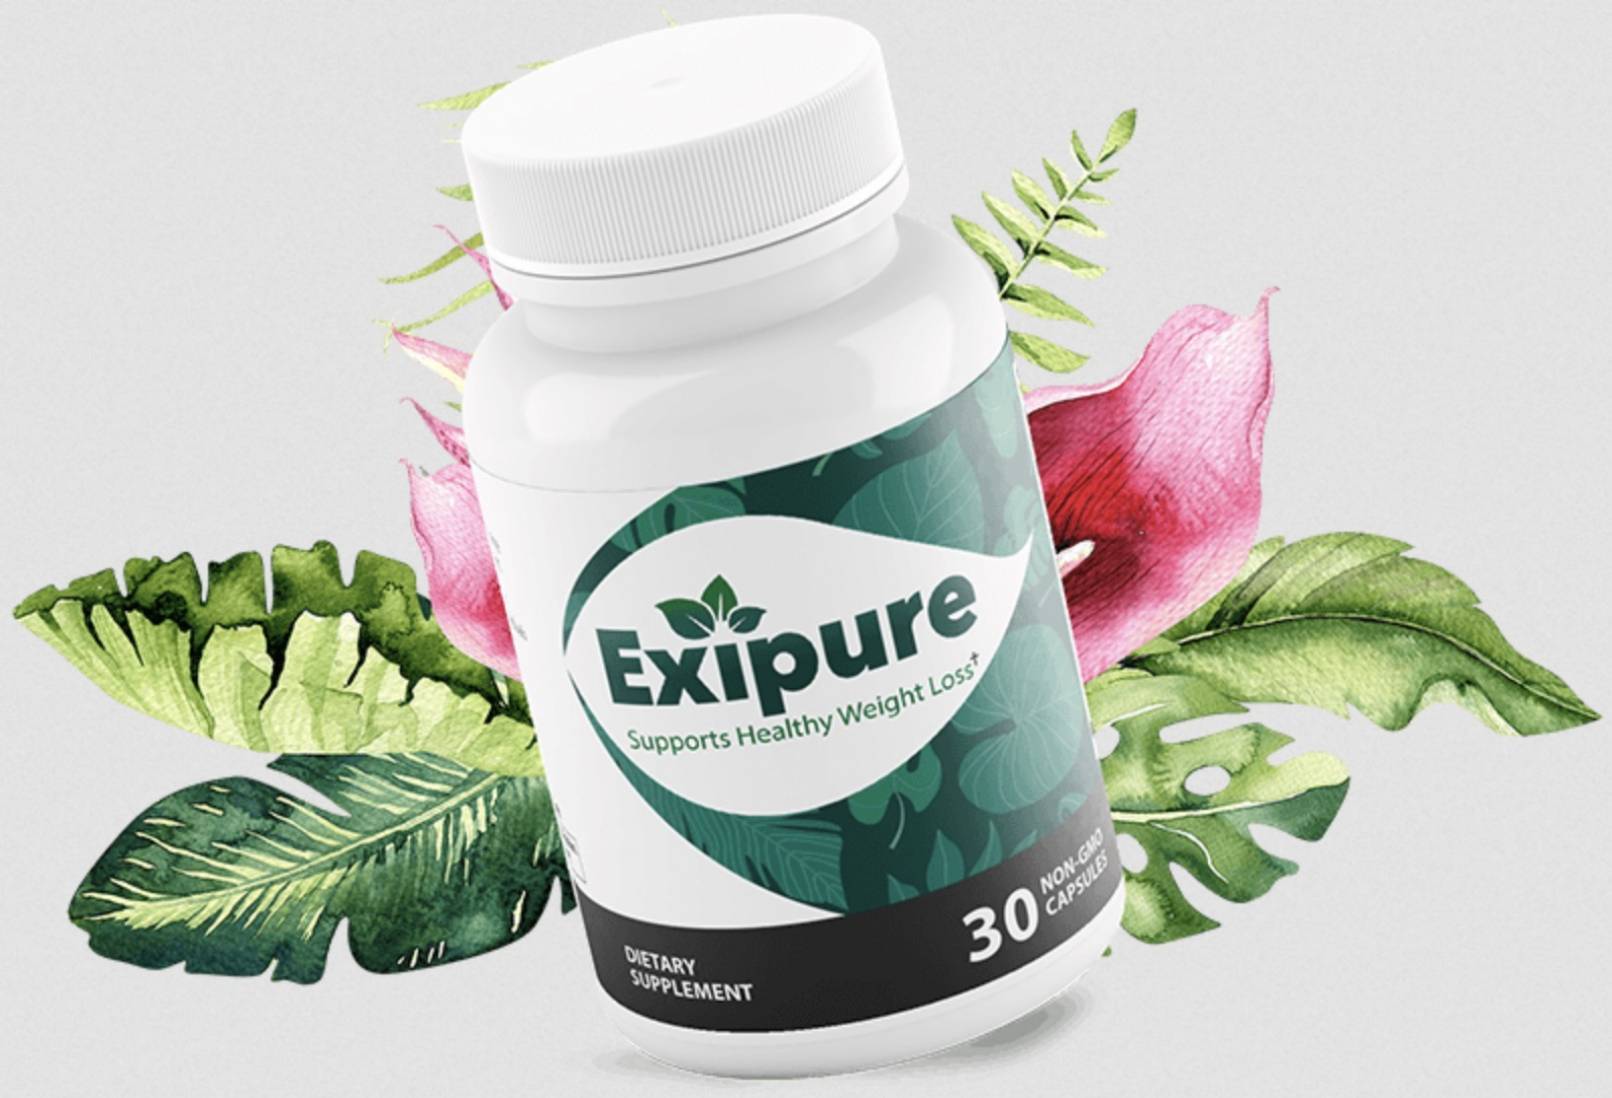 Is Exipure Good